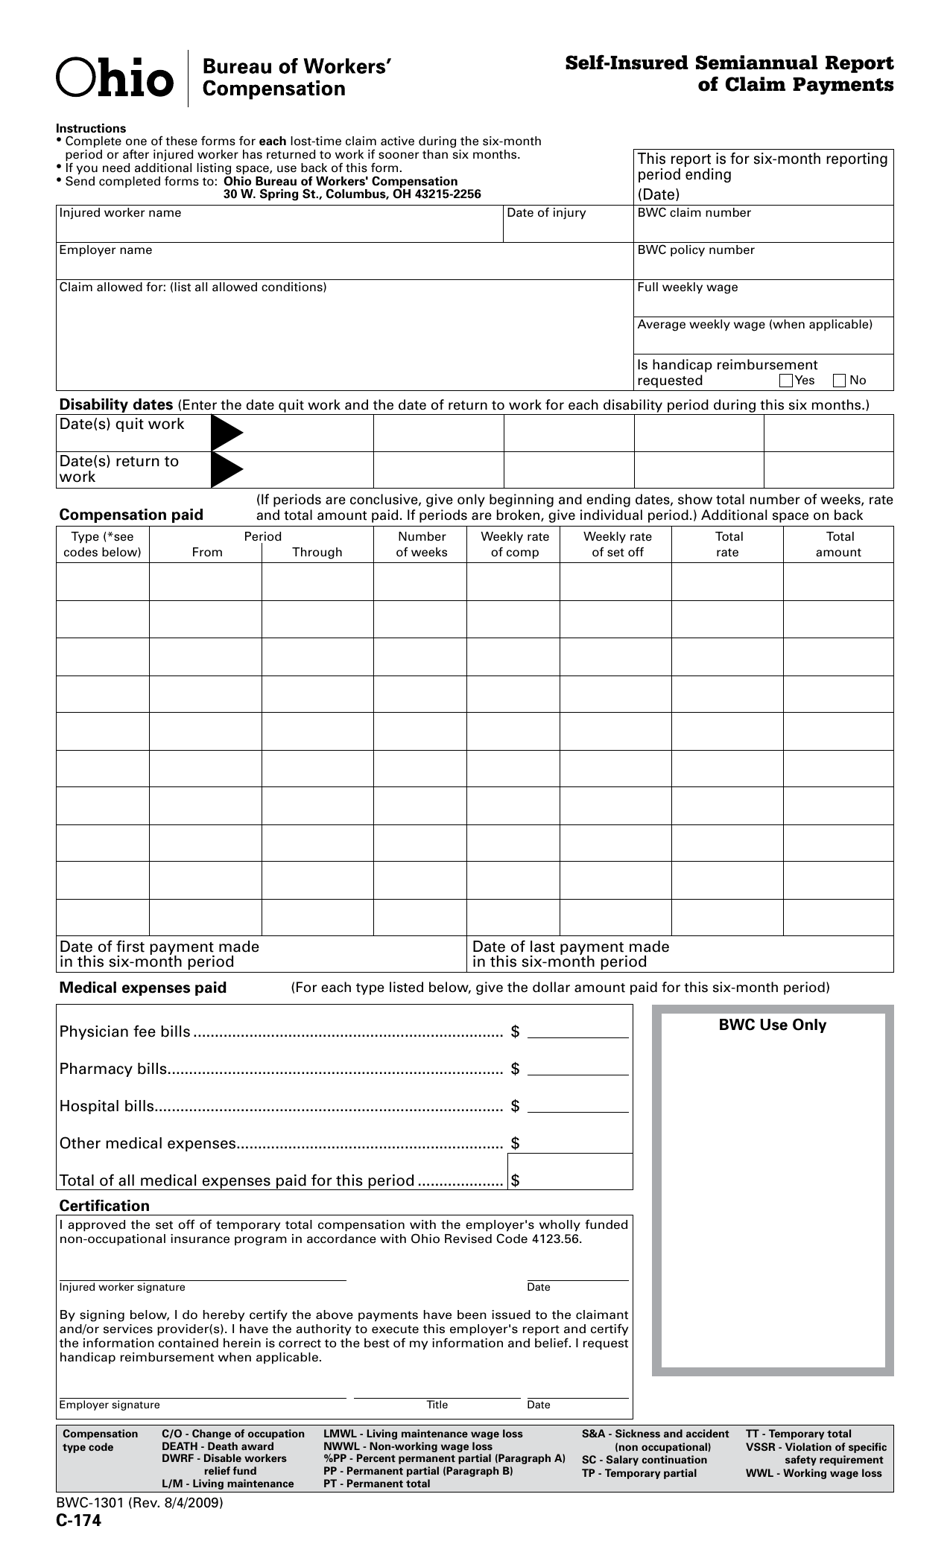 Form C-174 (BWC-1301) Self-insured Semiannual Report of Claim Payments - Ohio, Page 1